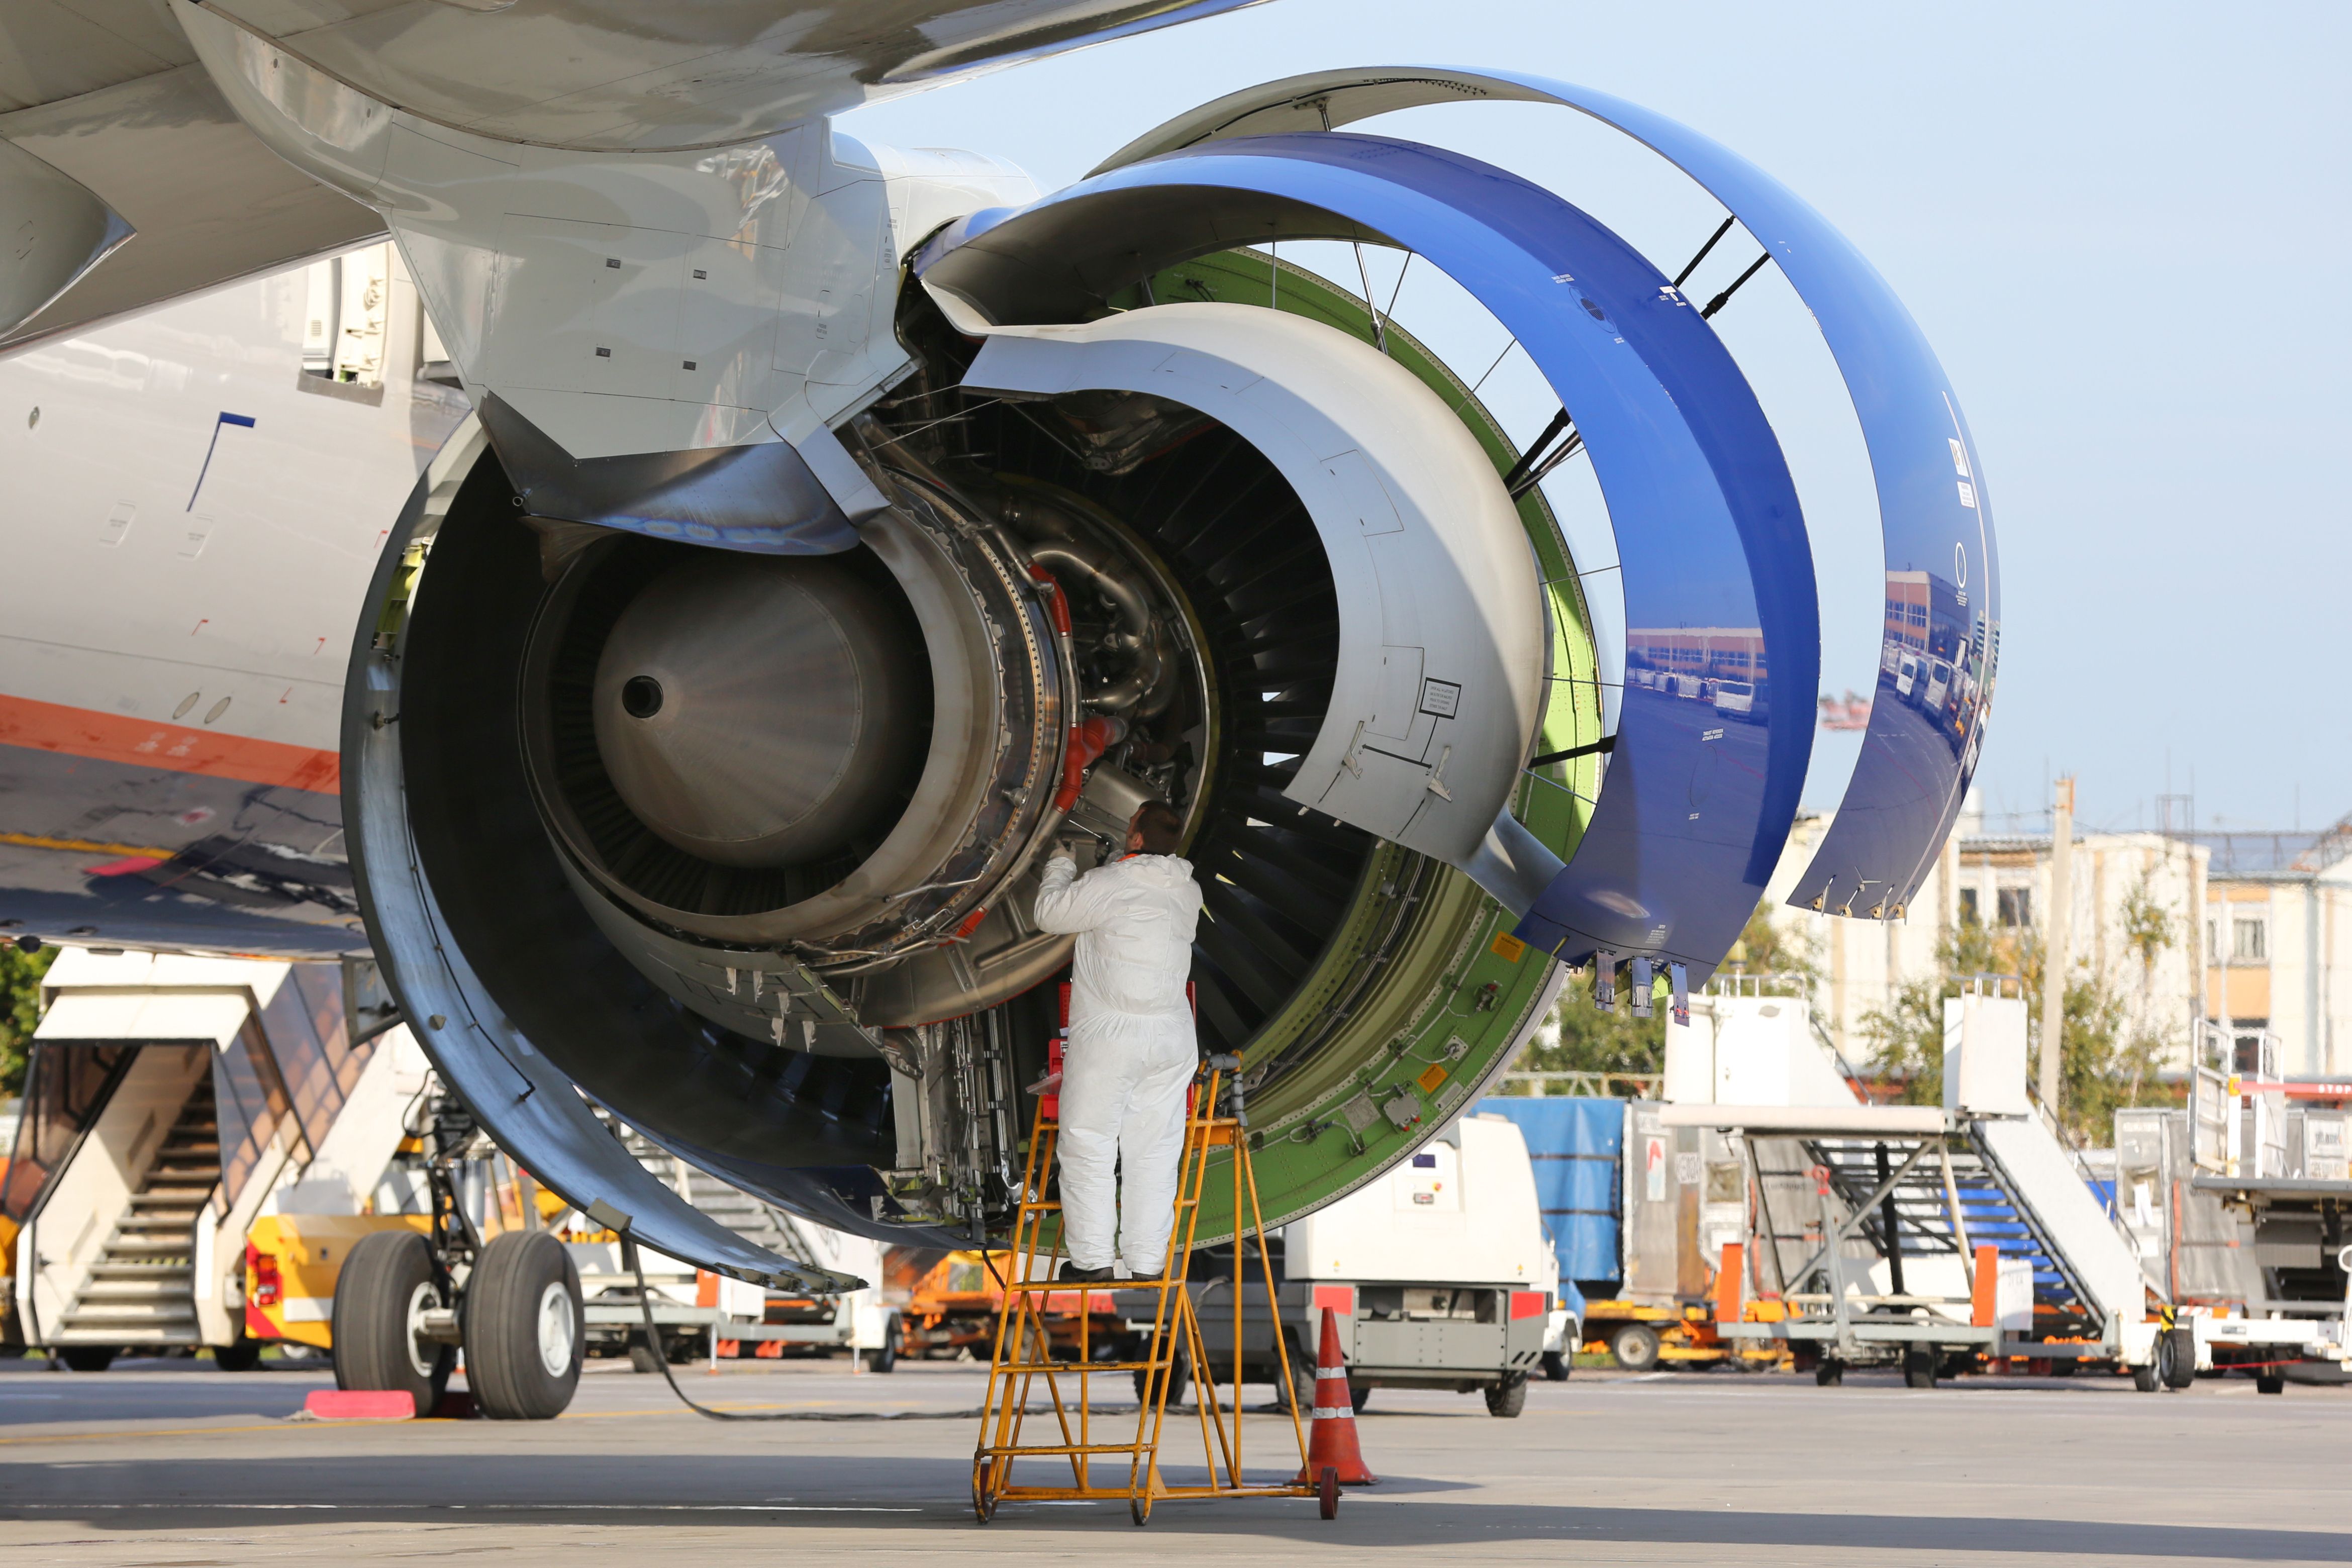 An engine being checked by an engineer.